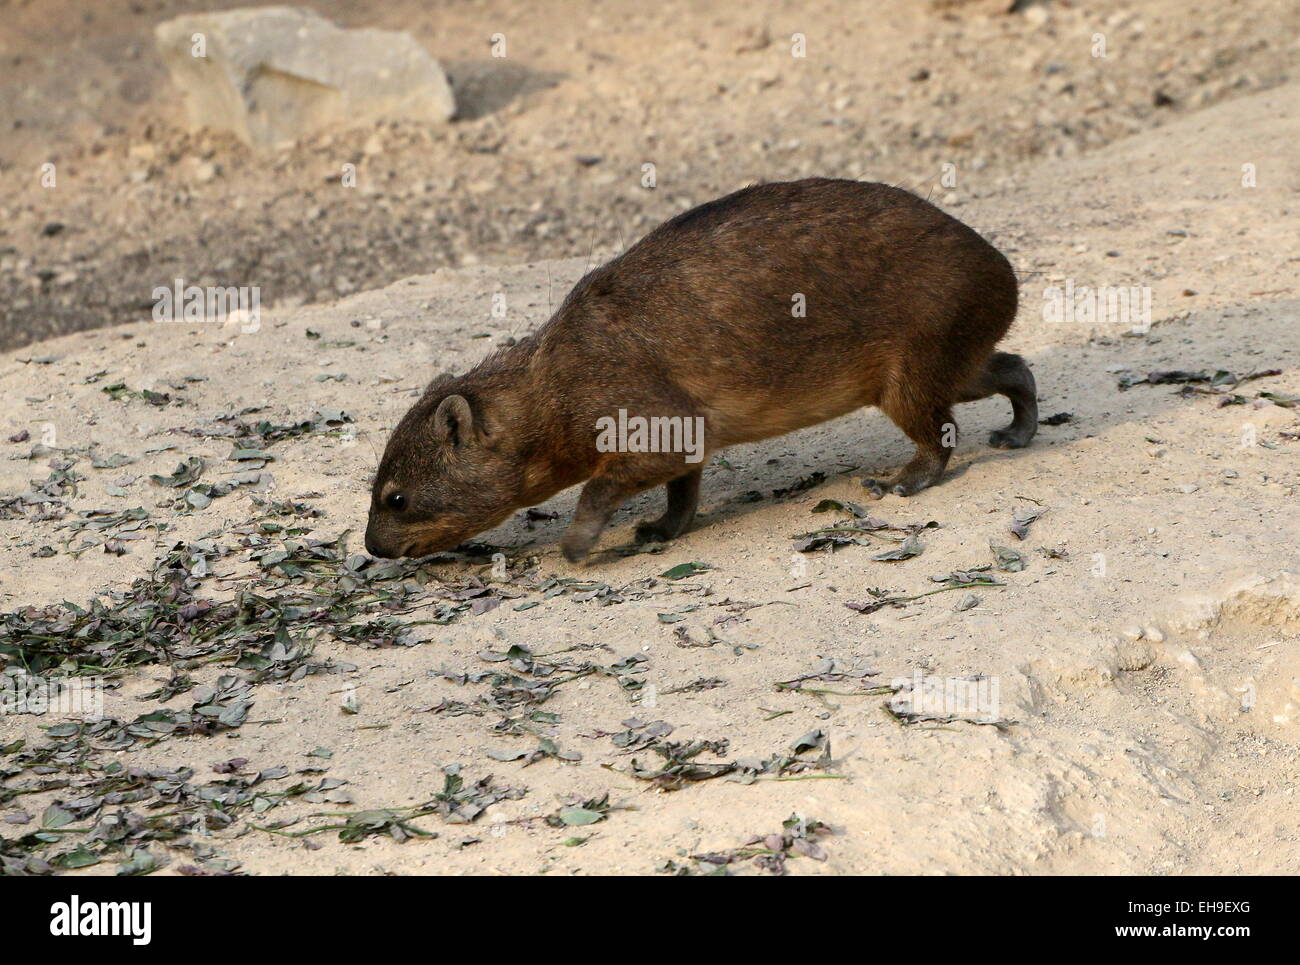 Juvenile South African Cape or rock hyrax (Procavia capensis), a.k.a. Rock badger or 'Dassie' doing a little exploring Stock Photo